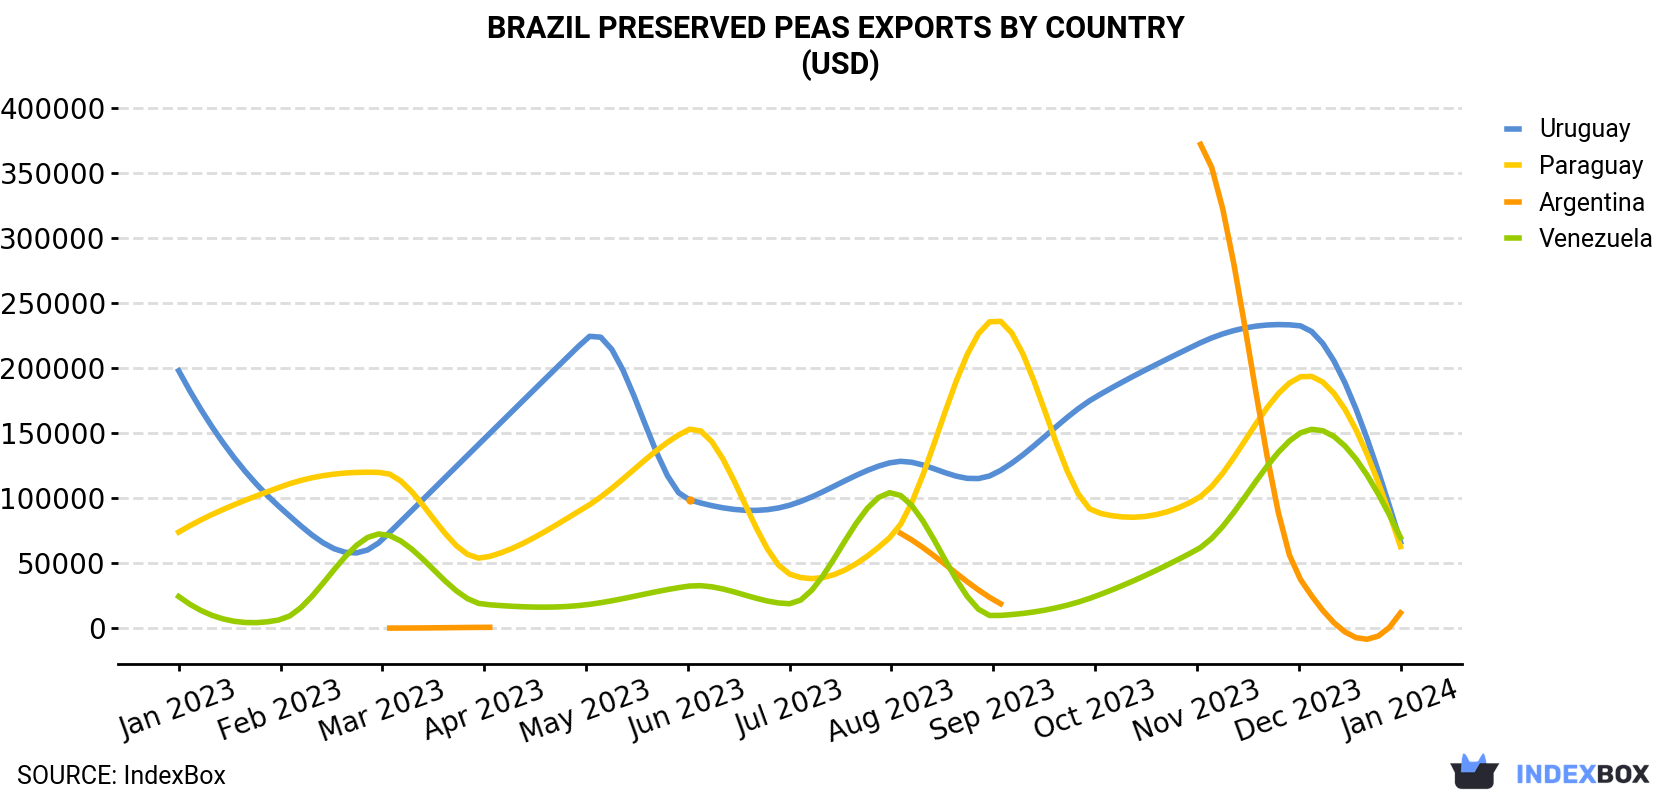 Brazil Preserved Peas Exports By Country (USD)